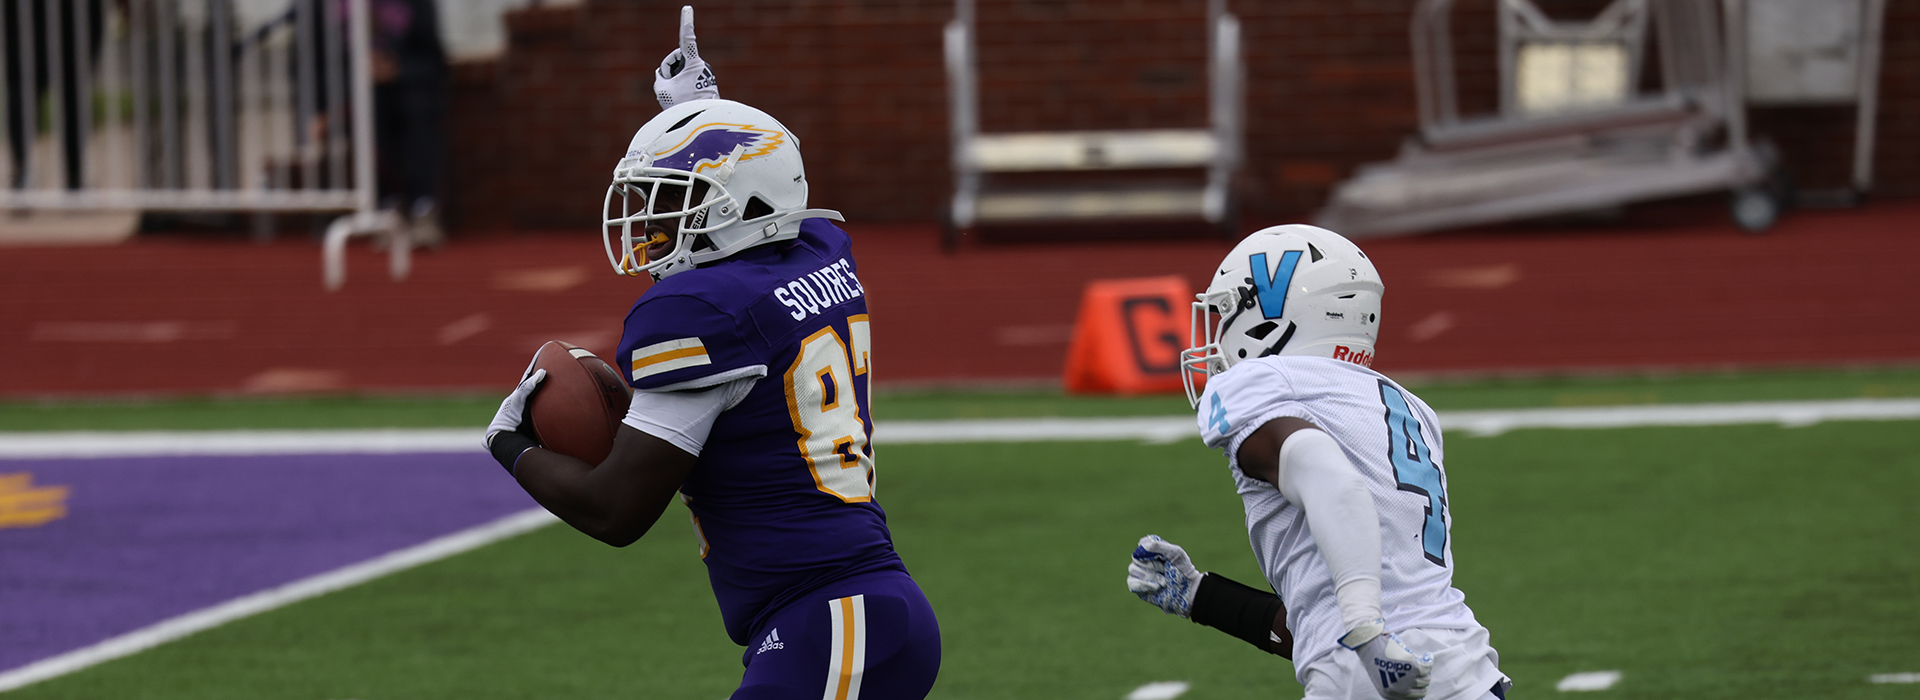 FCS All-In: A Legacy of Excellence at Tennessee Tech